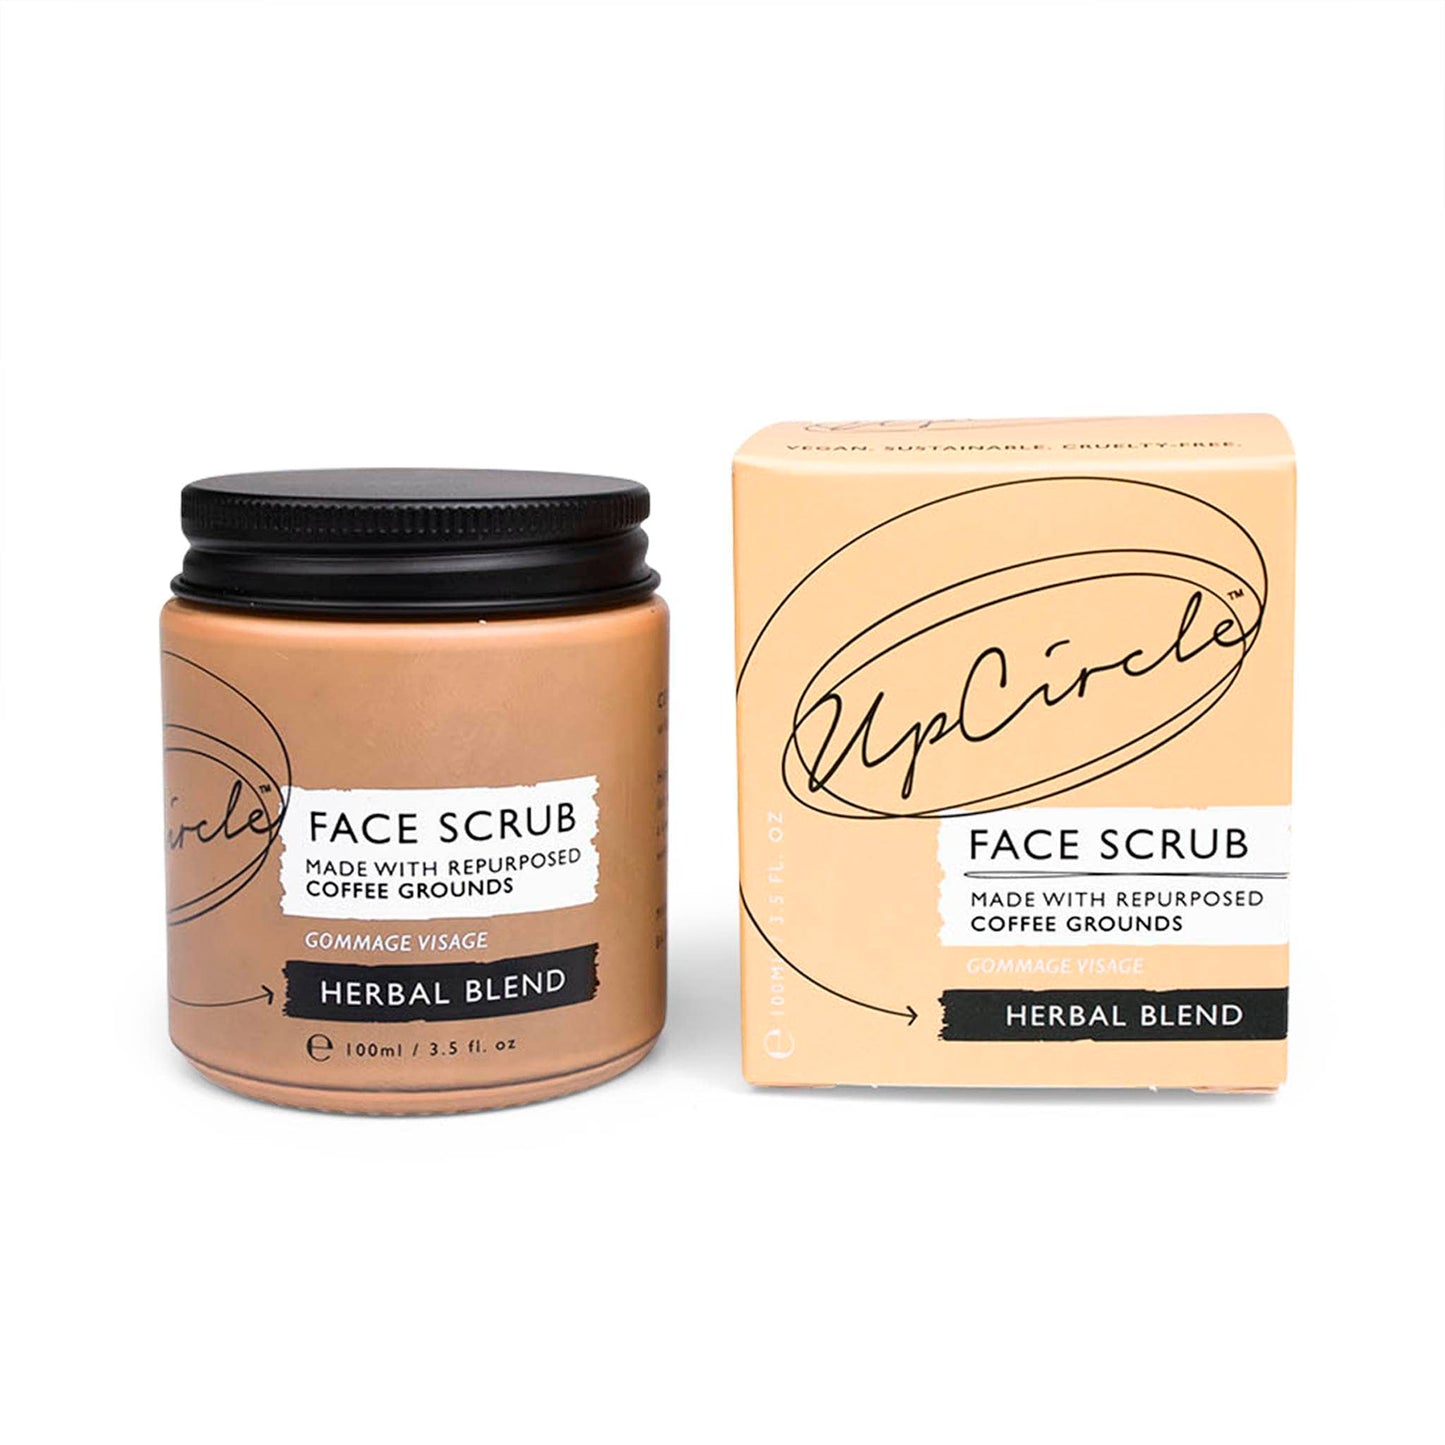 UpCircle Skincare Coffee Face Scrub - Herbal Blend for Oily & Combination Skin 100ml Jar - UpCircle Beauty